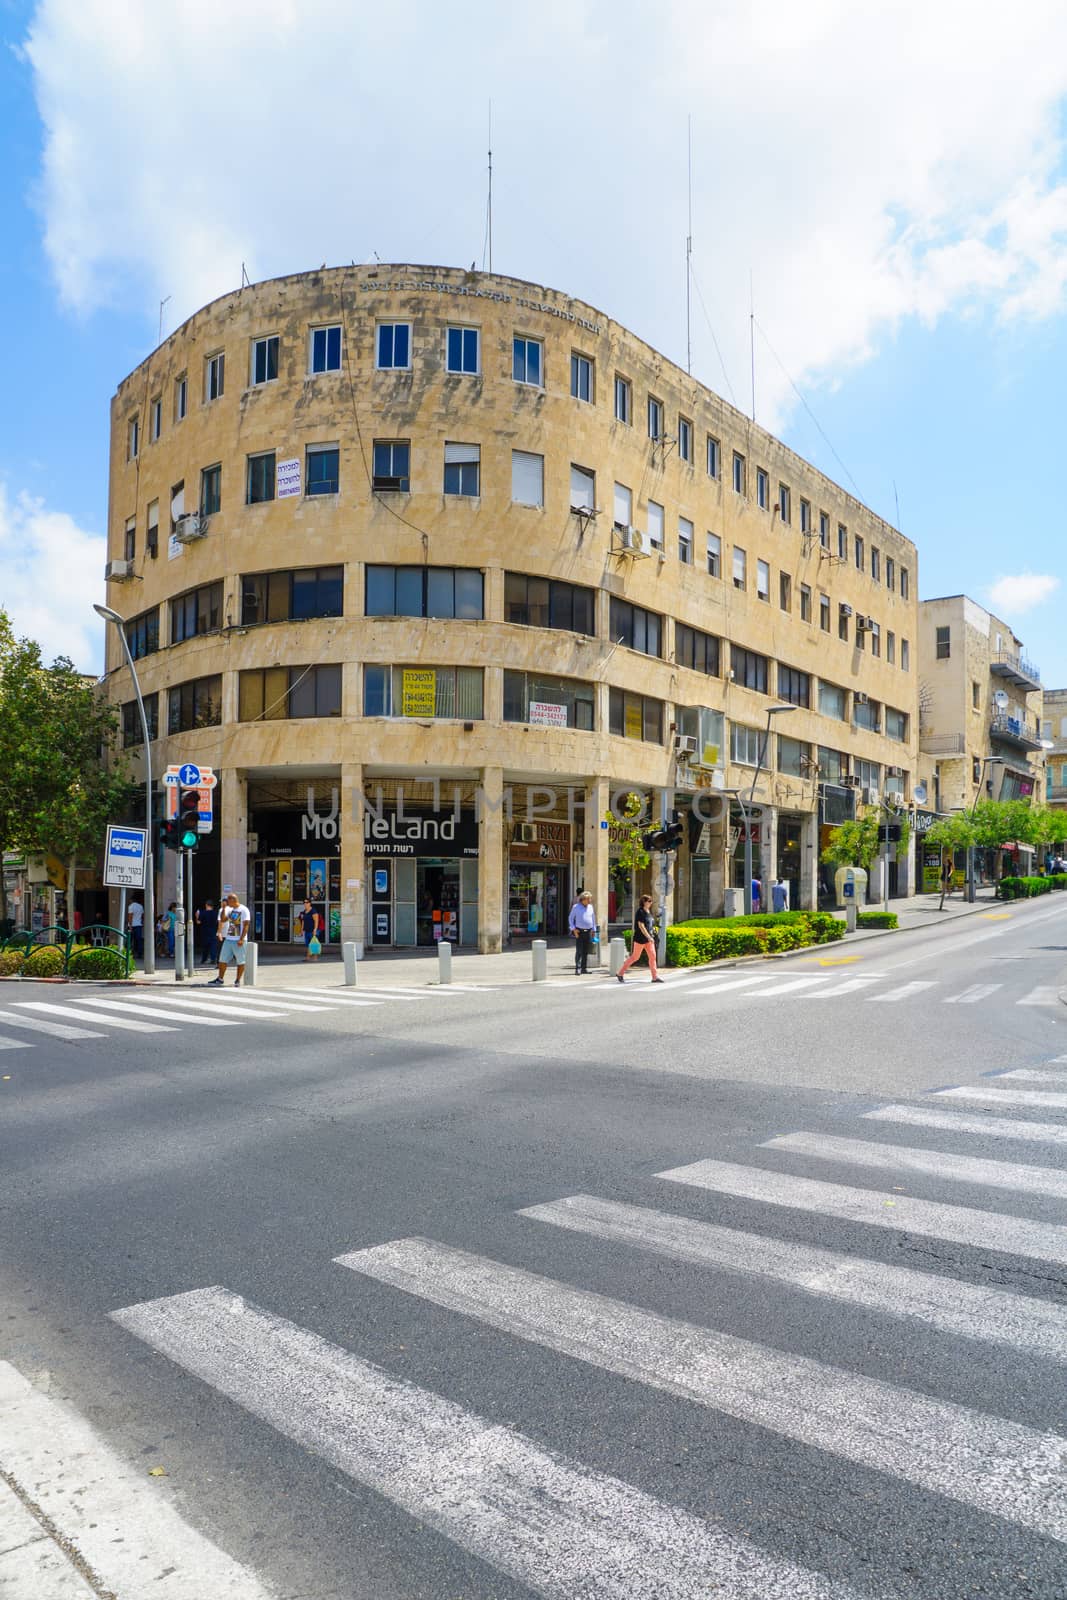 HAIFA, ISRAEL - AUGUST 18, 2016: Scene of Masaryk square in Hadar HaCarmel district, with local businesses, locals and visitors, in Haifa, Israel